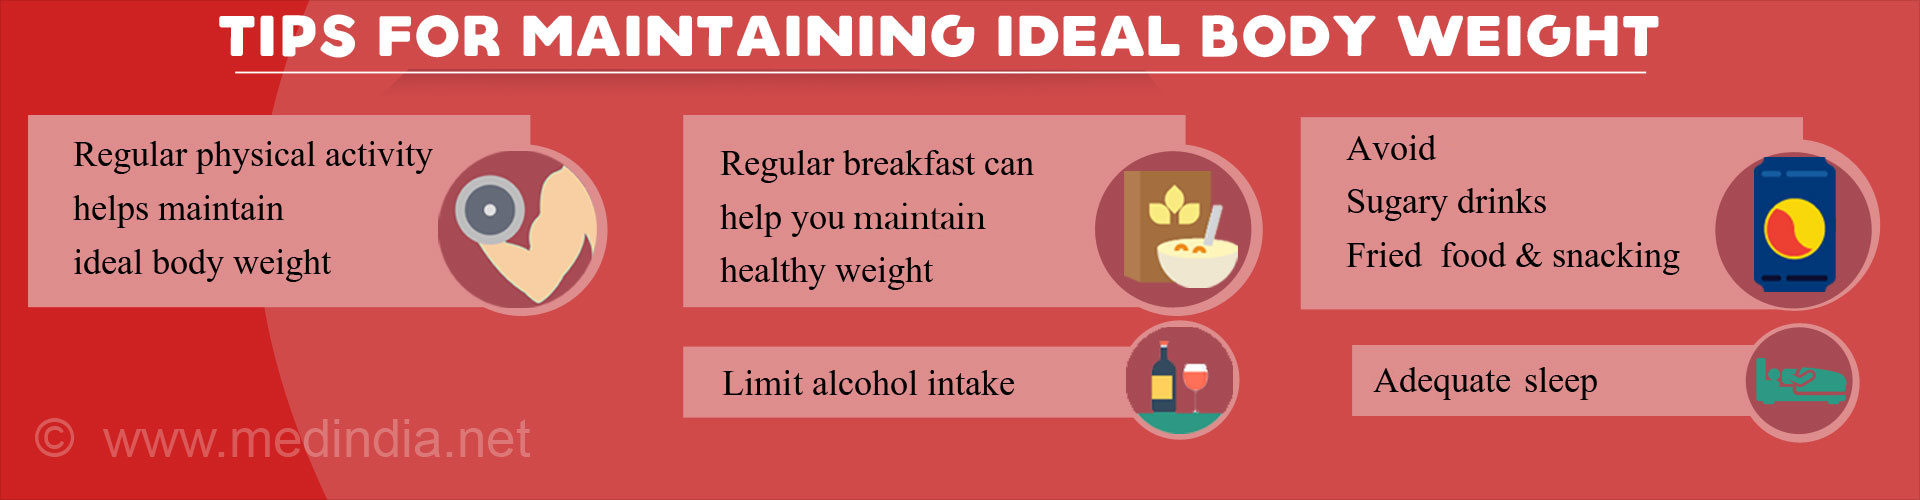 Tips for Maintaining Ideal Body Weight
- Regular physical activity helps maintain ideal body weight
- Regular breakfast can help you manage healthy weight
- Limit alcohol intake
- Avoid - sugary drinks, fried food & snacking
- Adequate sleep